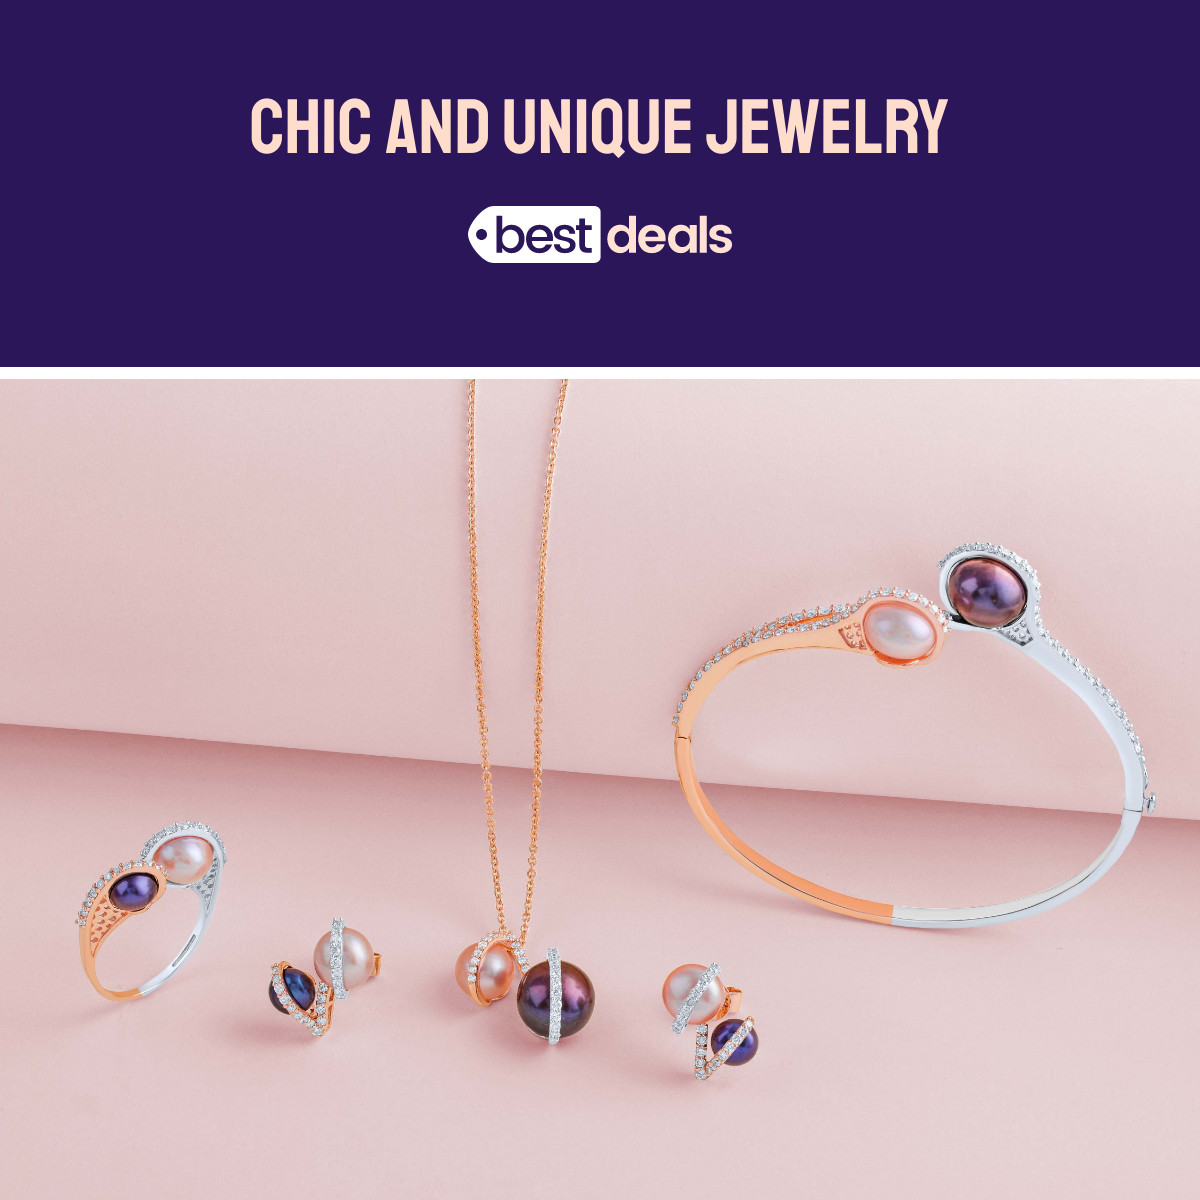 Chic and Unique Jewelry Deals Inline Rectangle 300x250